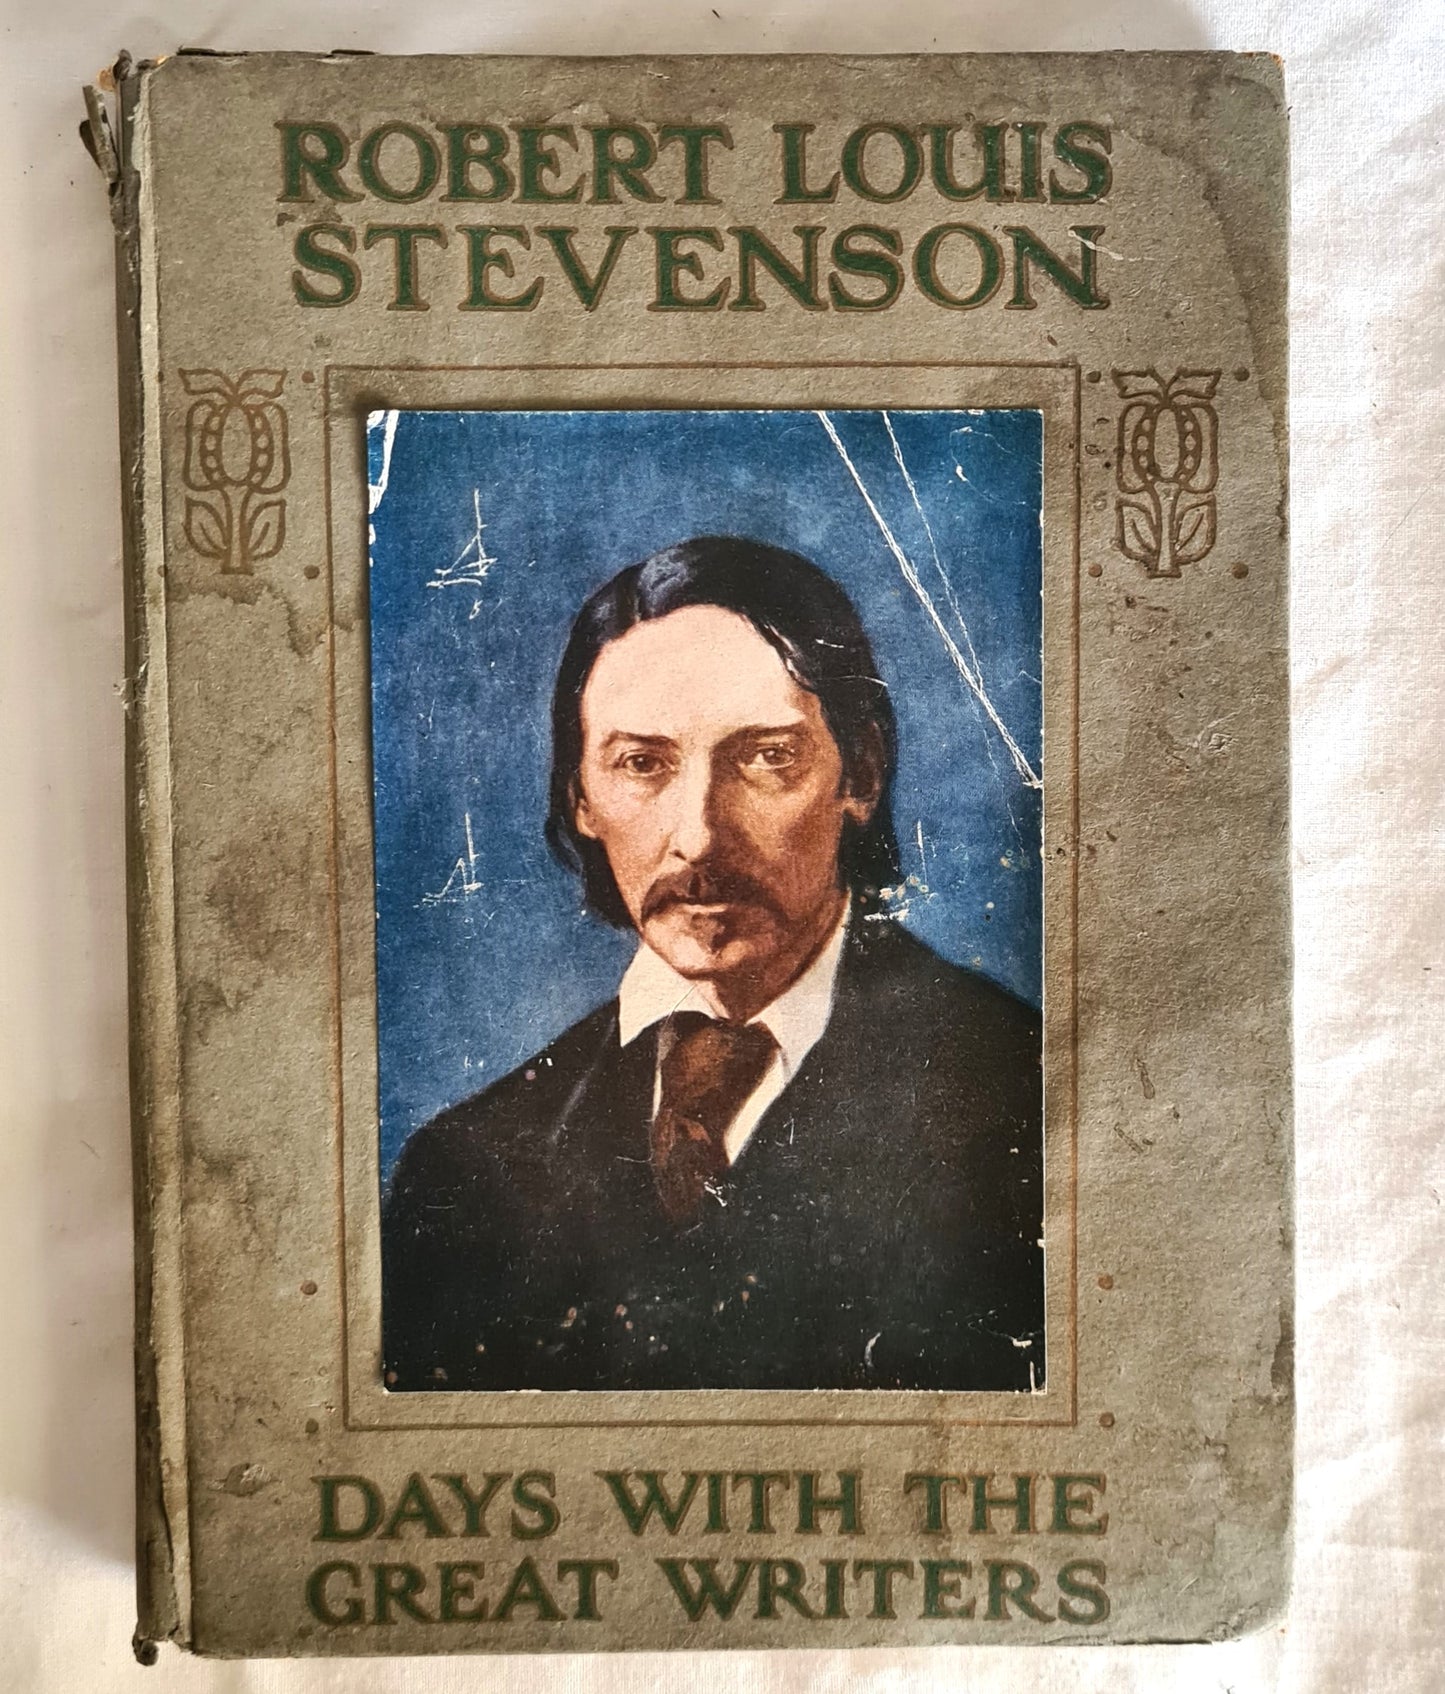 A Day With Robert Louis Stevenson  by Maurice Clare  ‘Days With the Great Writers’